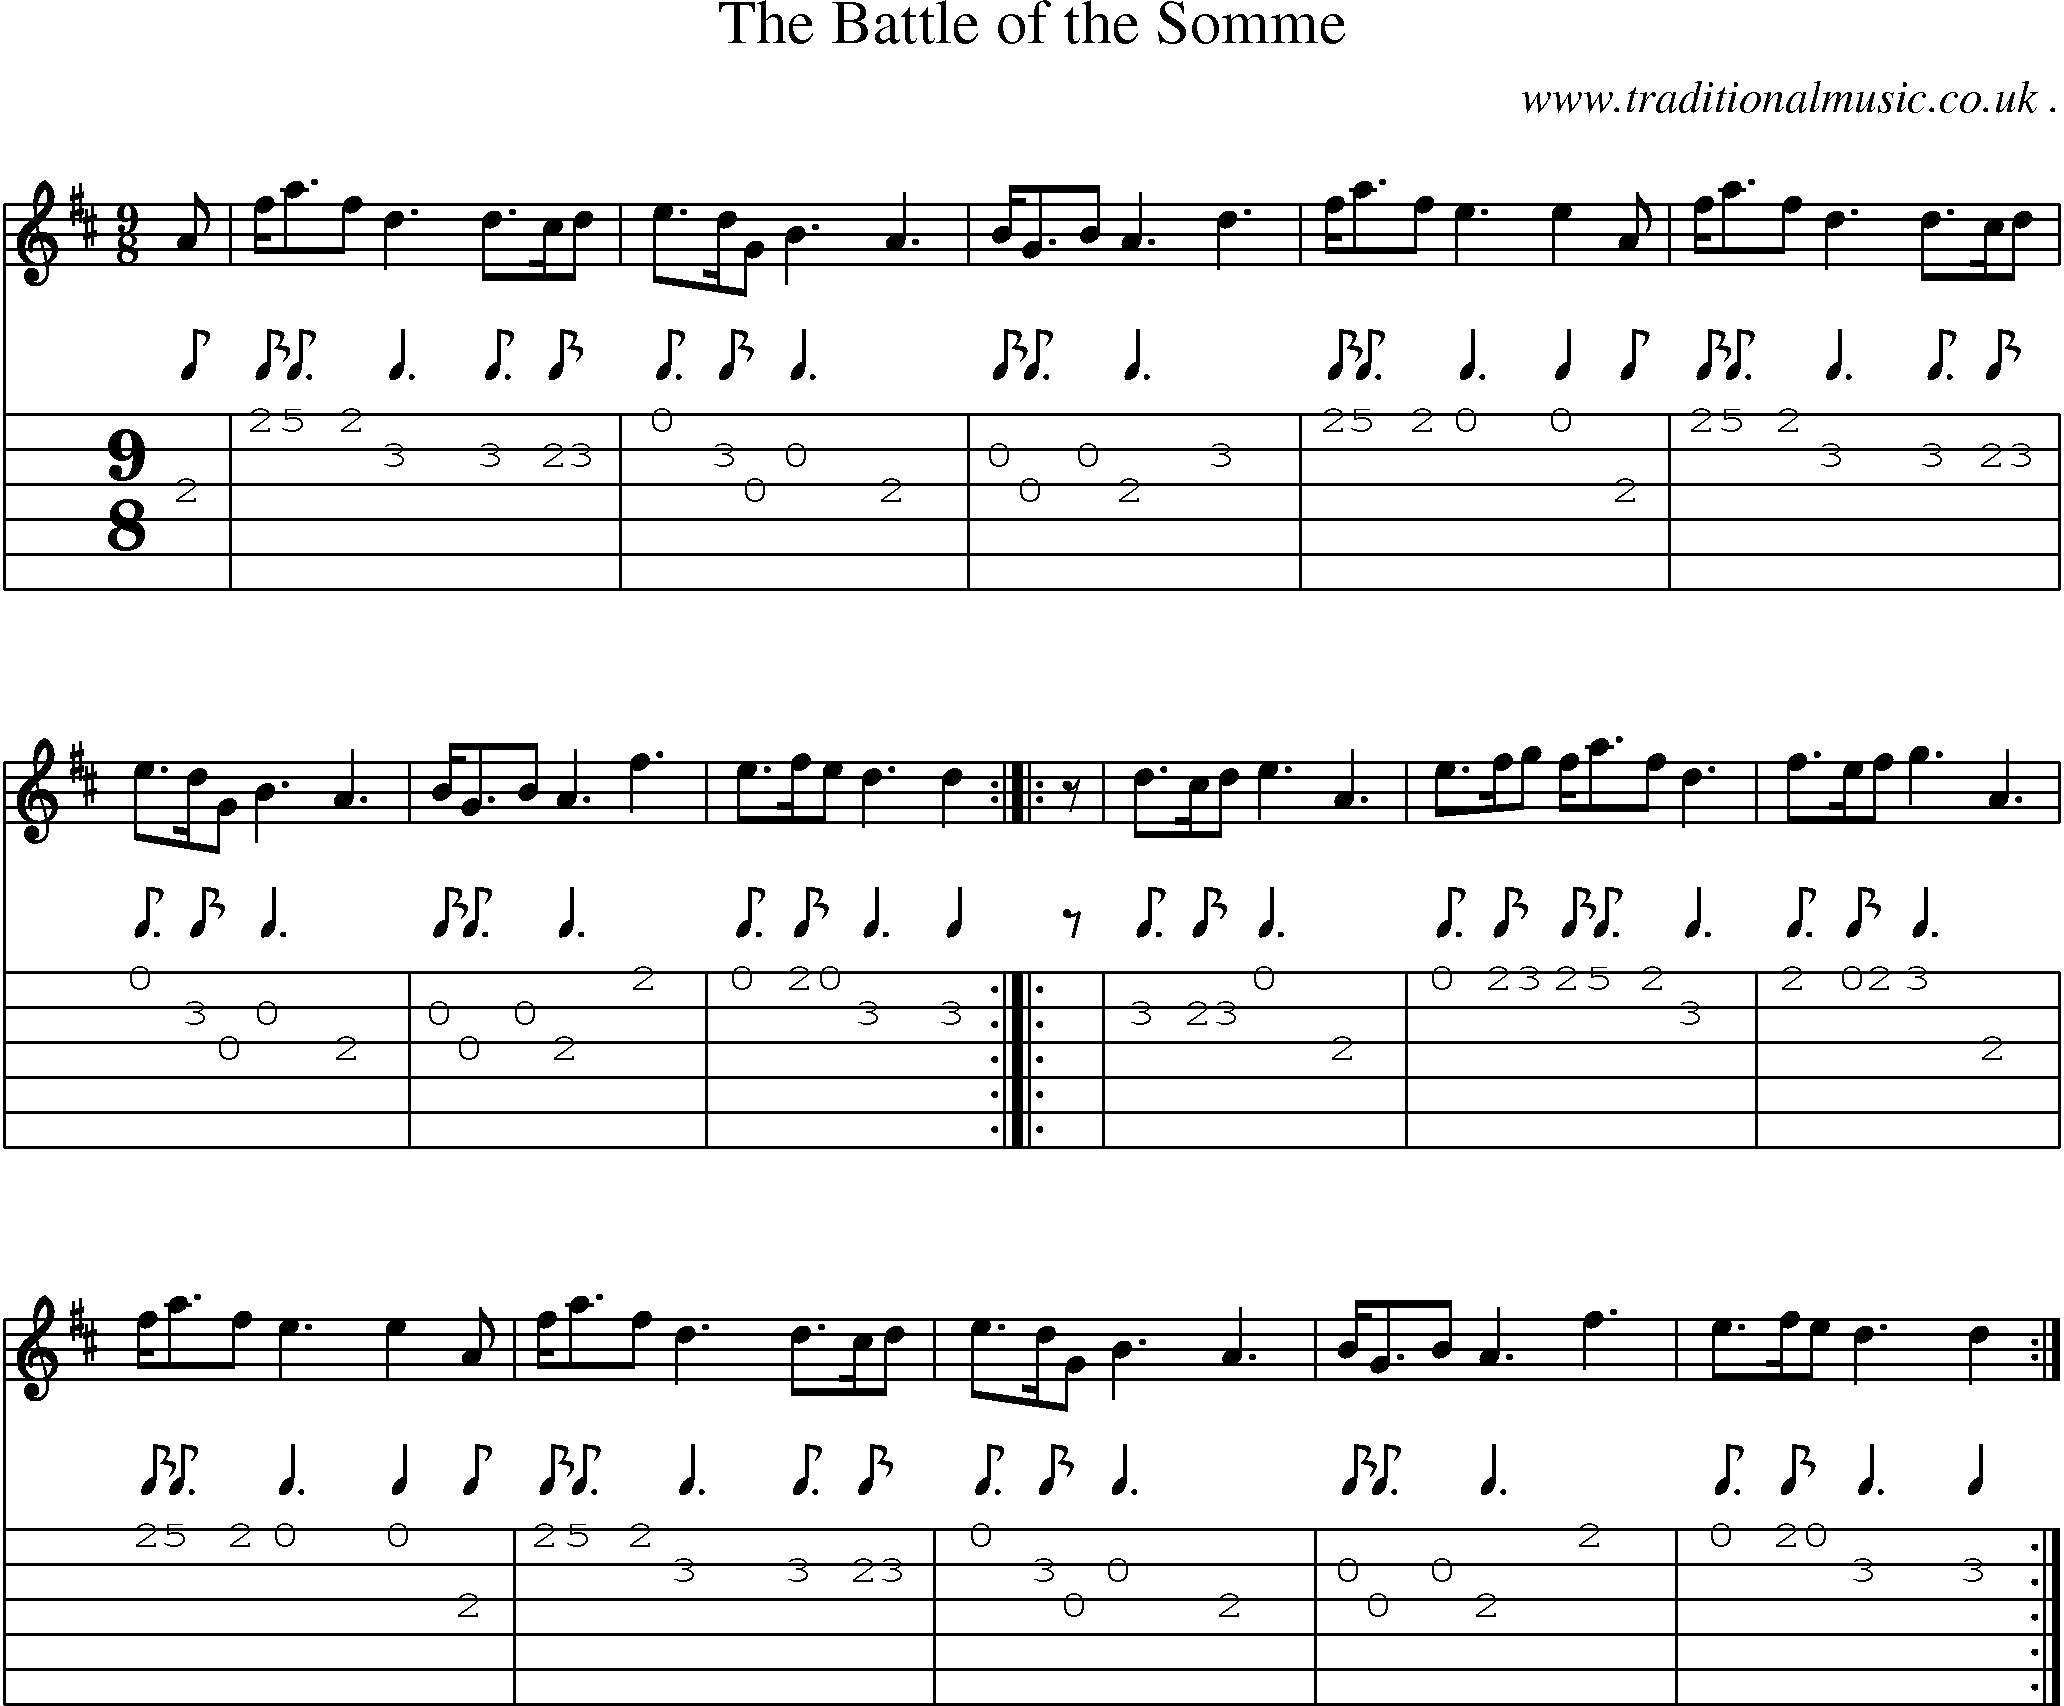 Sheet-music  score, Chords and Guitar Tabs for The Battle Of The Somme